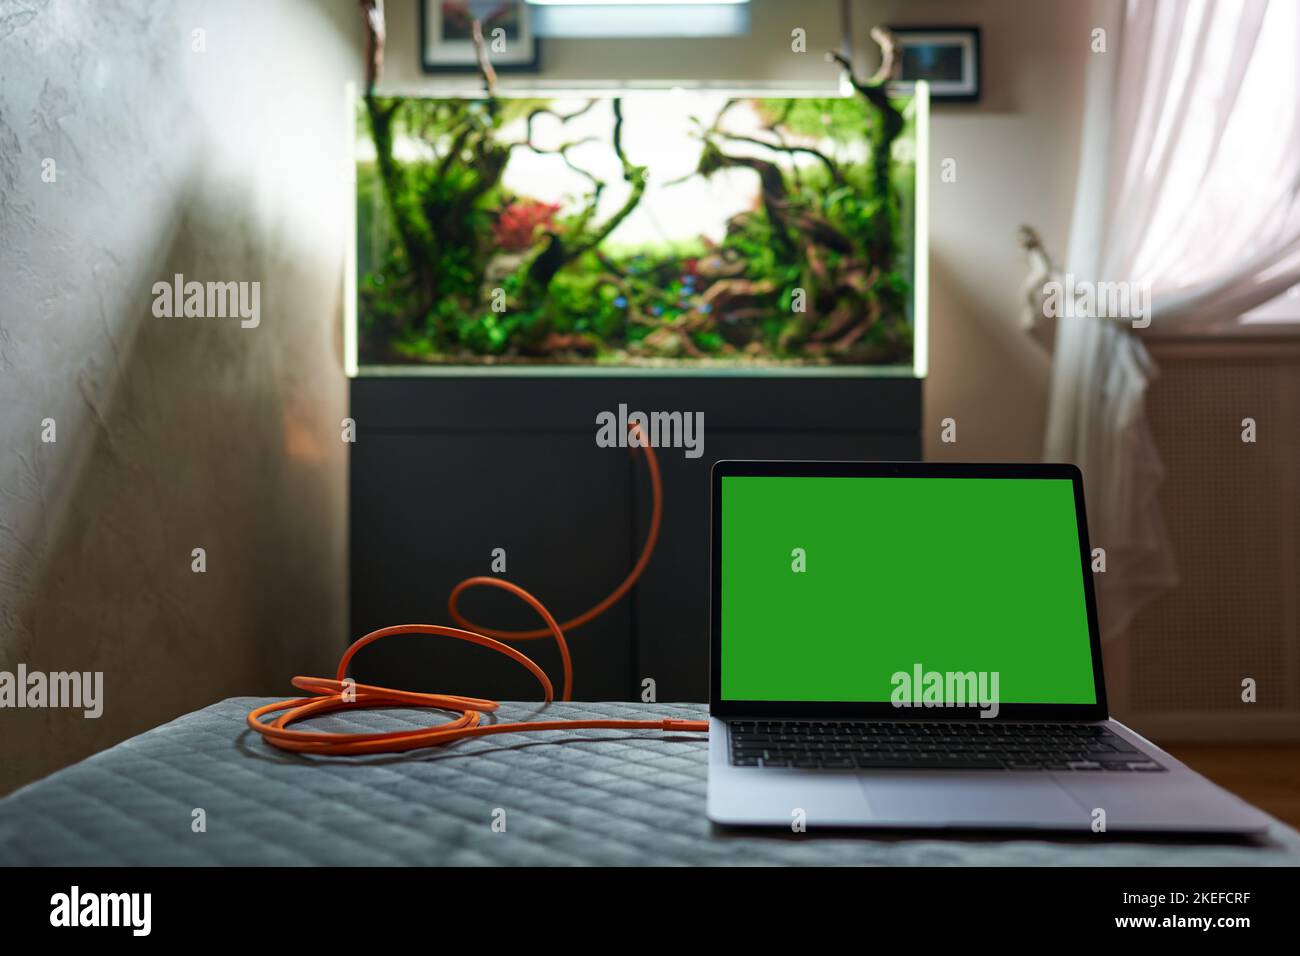 Aquarium connected to the laptop with green chromakey on a screen by long orange wire. Smart aquarium concept. Stock Photo